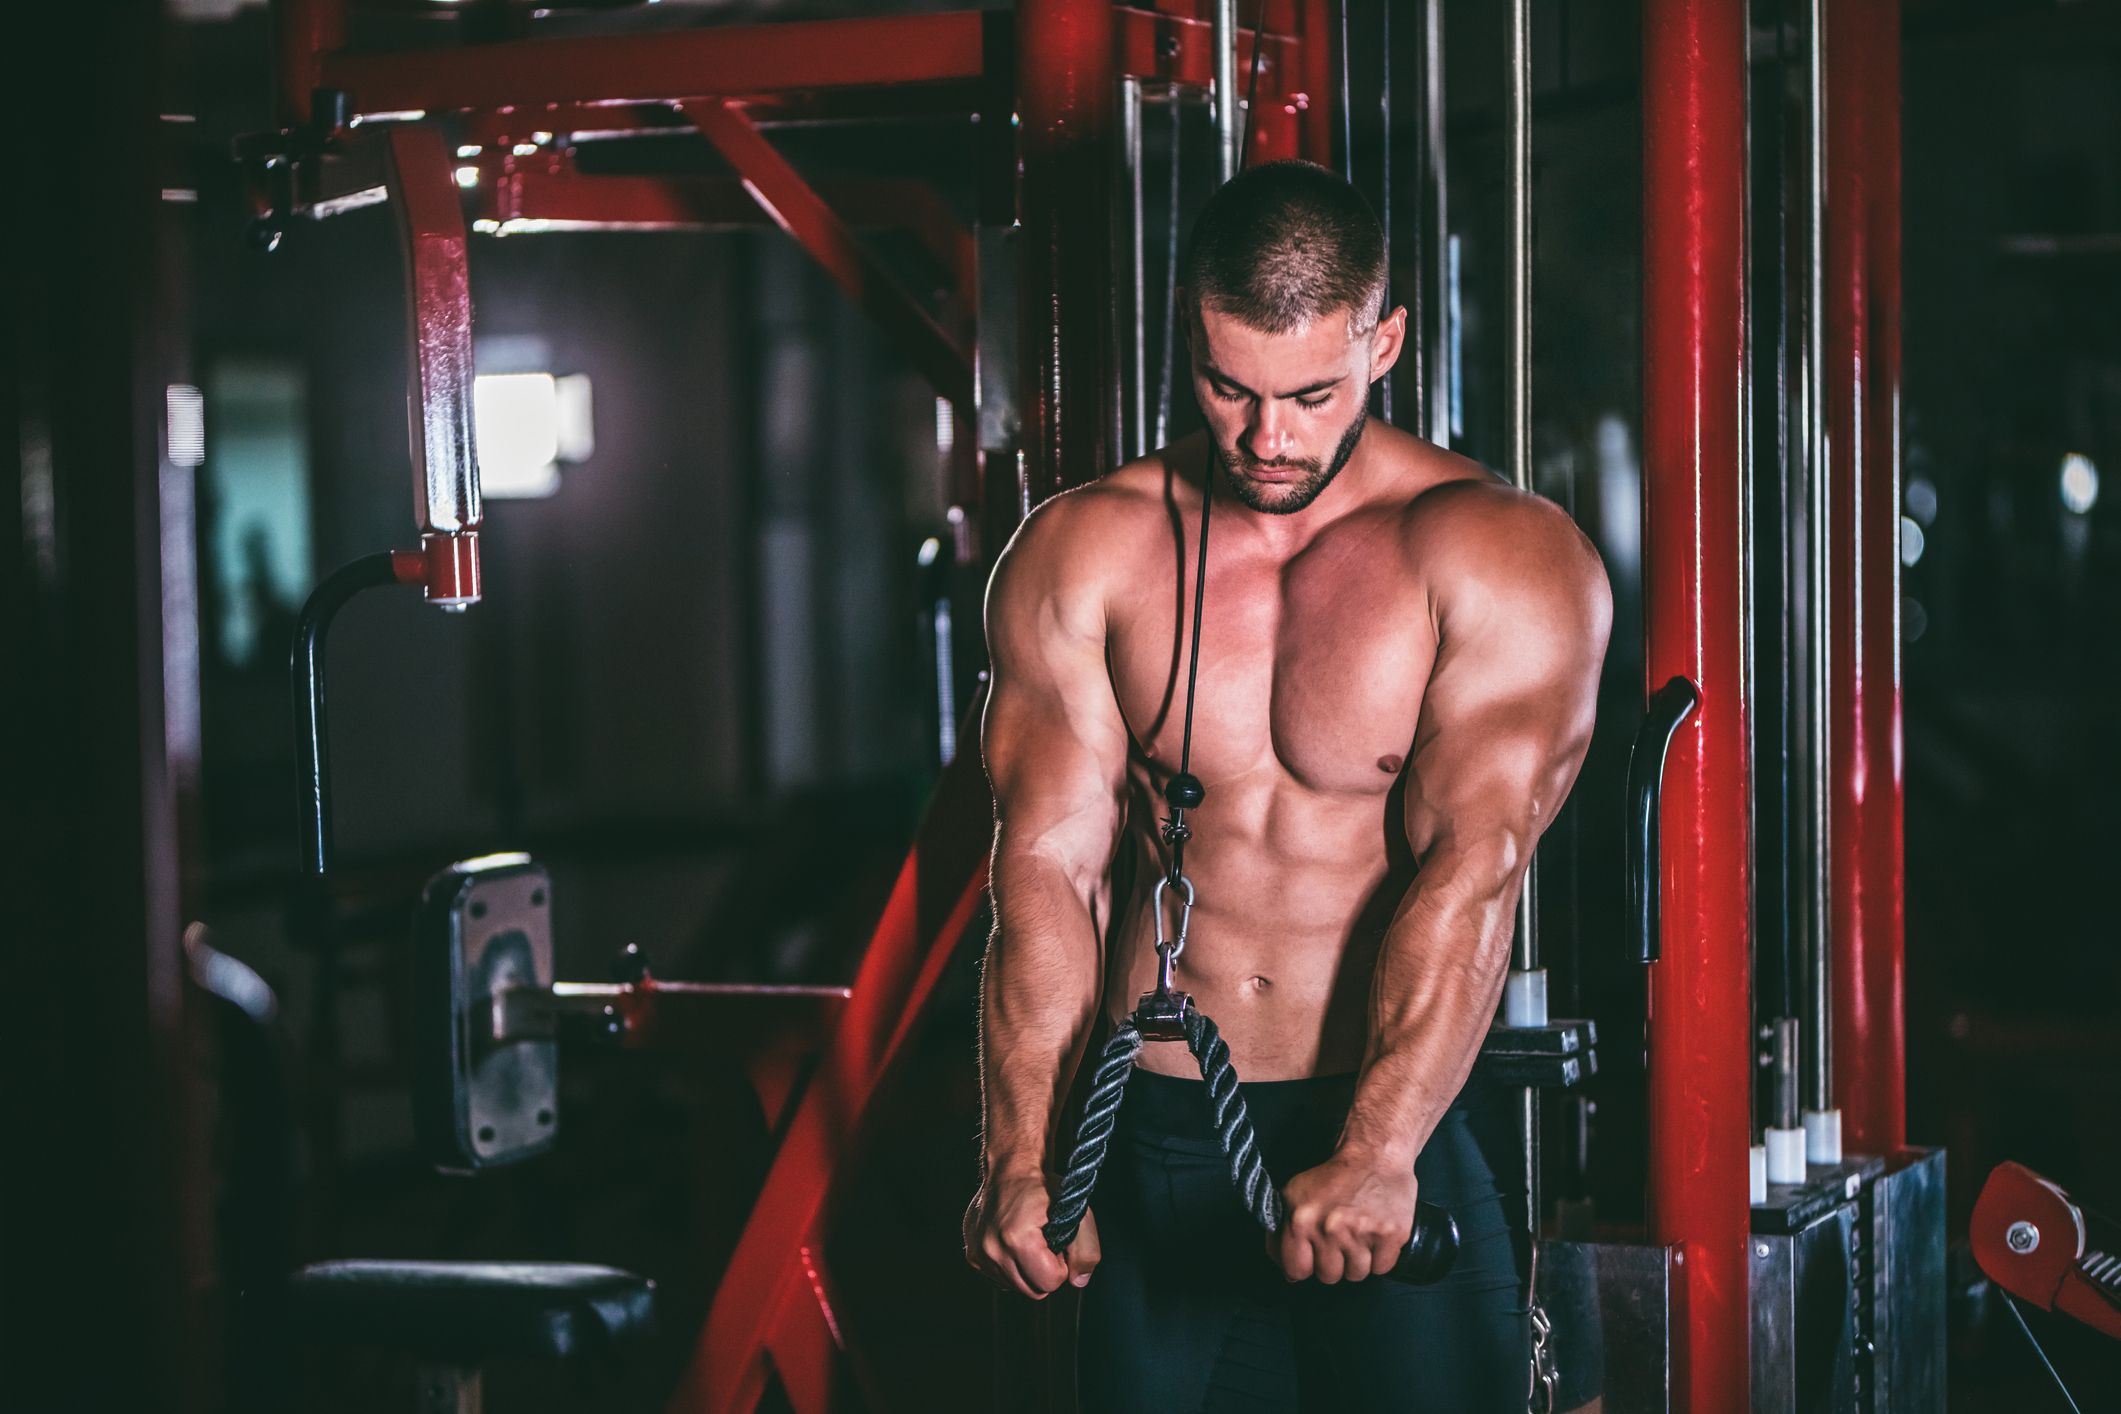 11 BEST Tricep Workout For Men in 2019, XtremeNoDirect.com